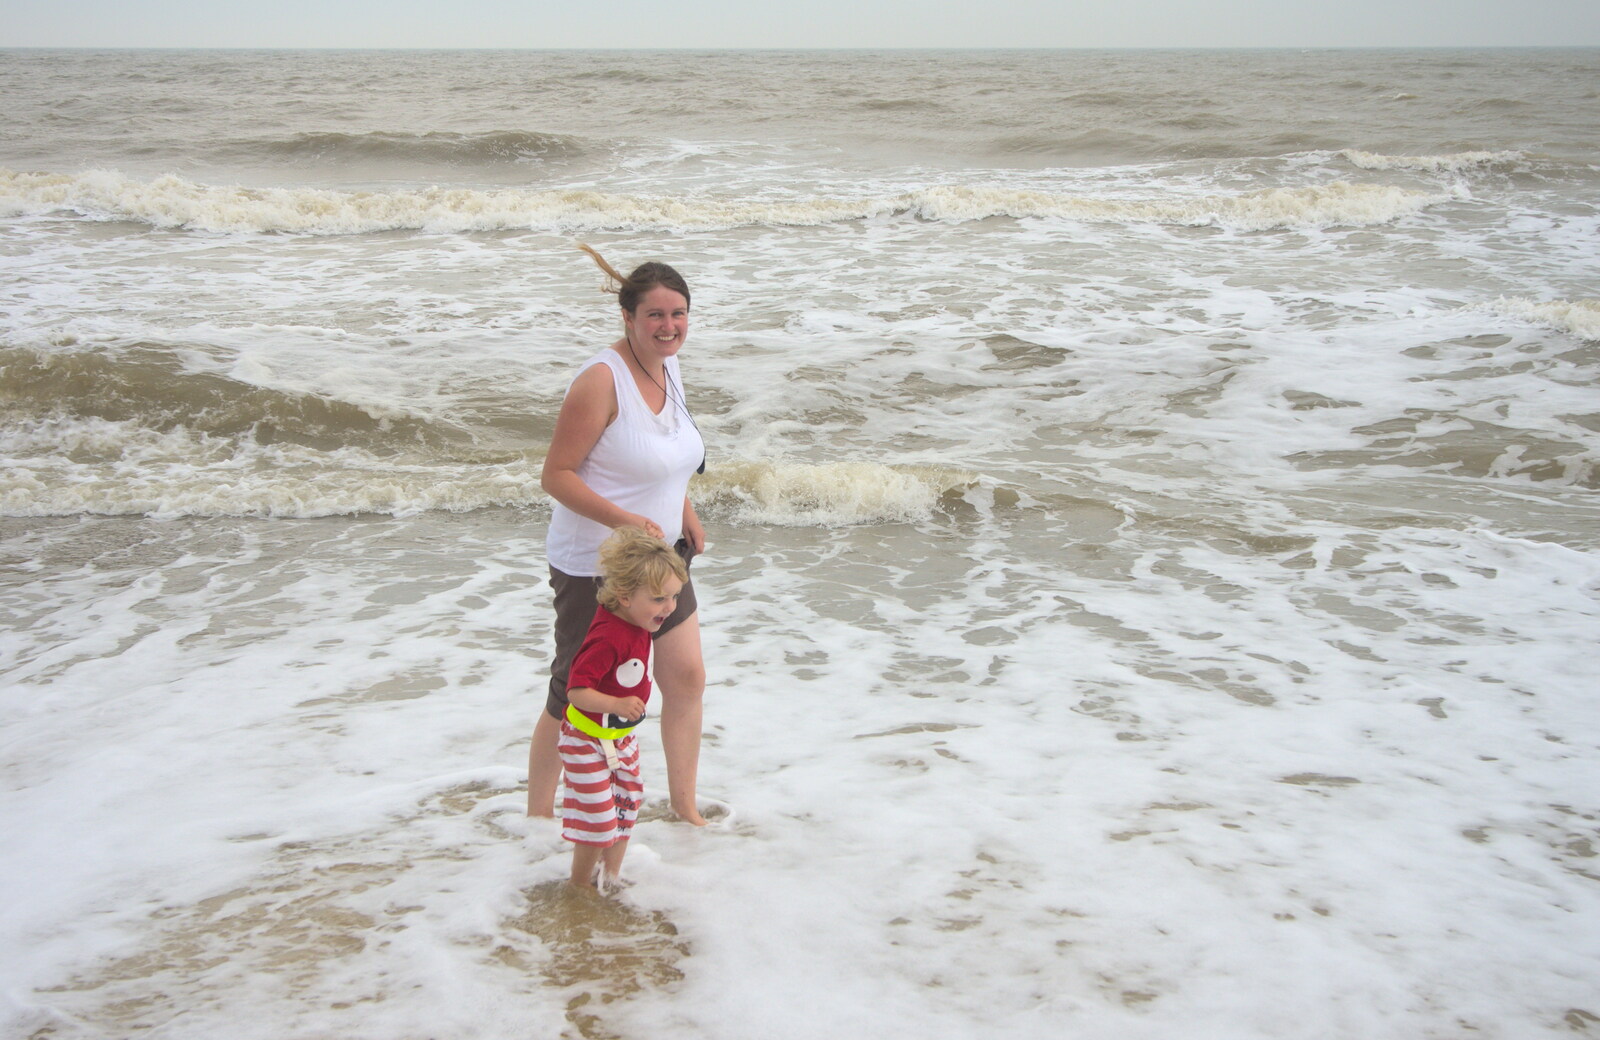 Fred and Isobel are in the sea from Camping by the Seaside, Cliff House, Dunwich, Suffolk - 15th August 2012